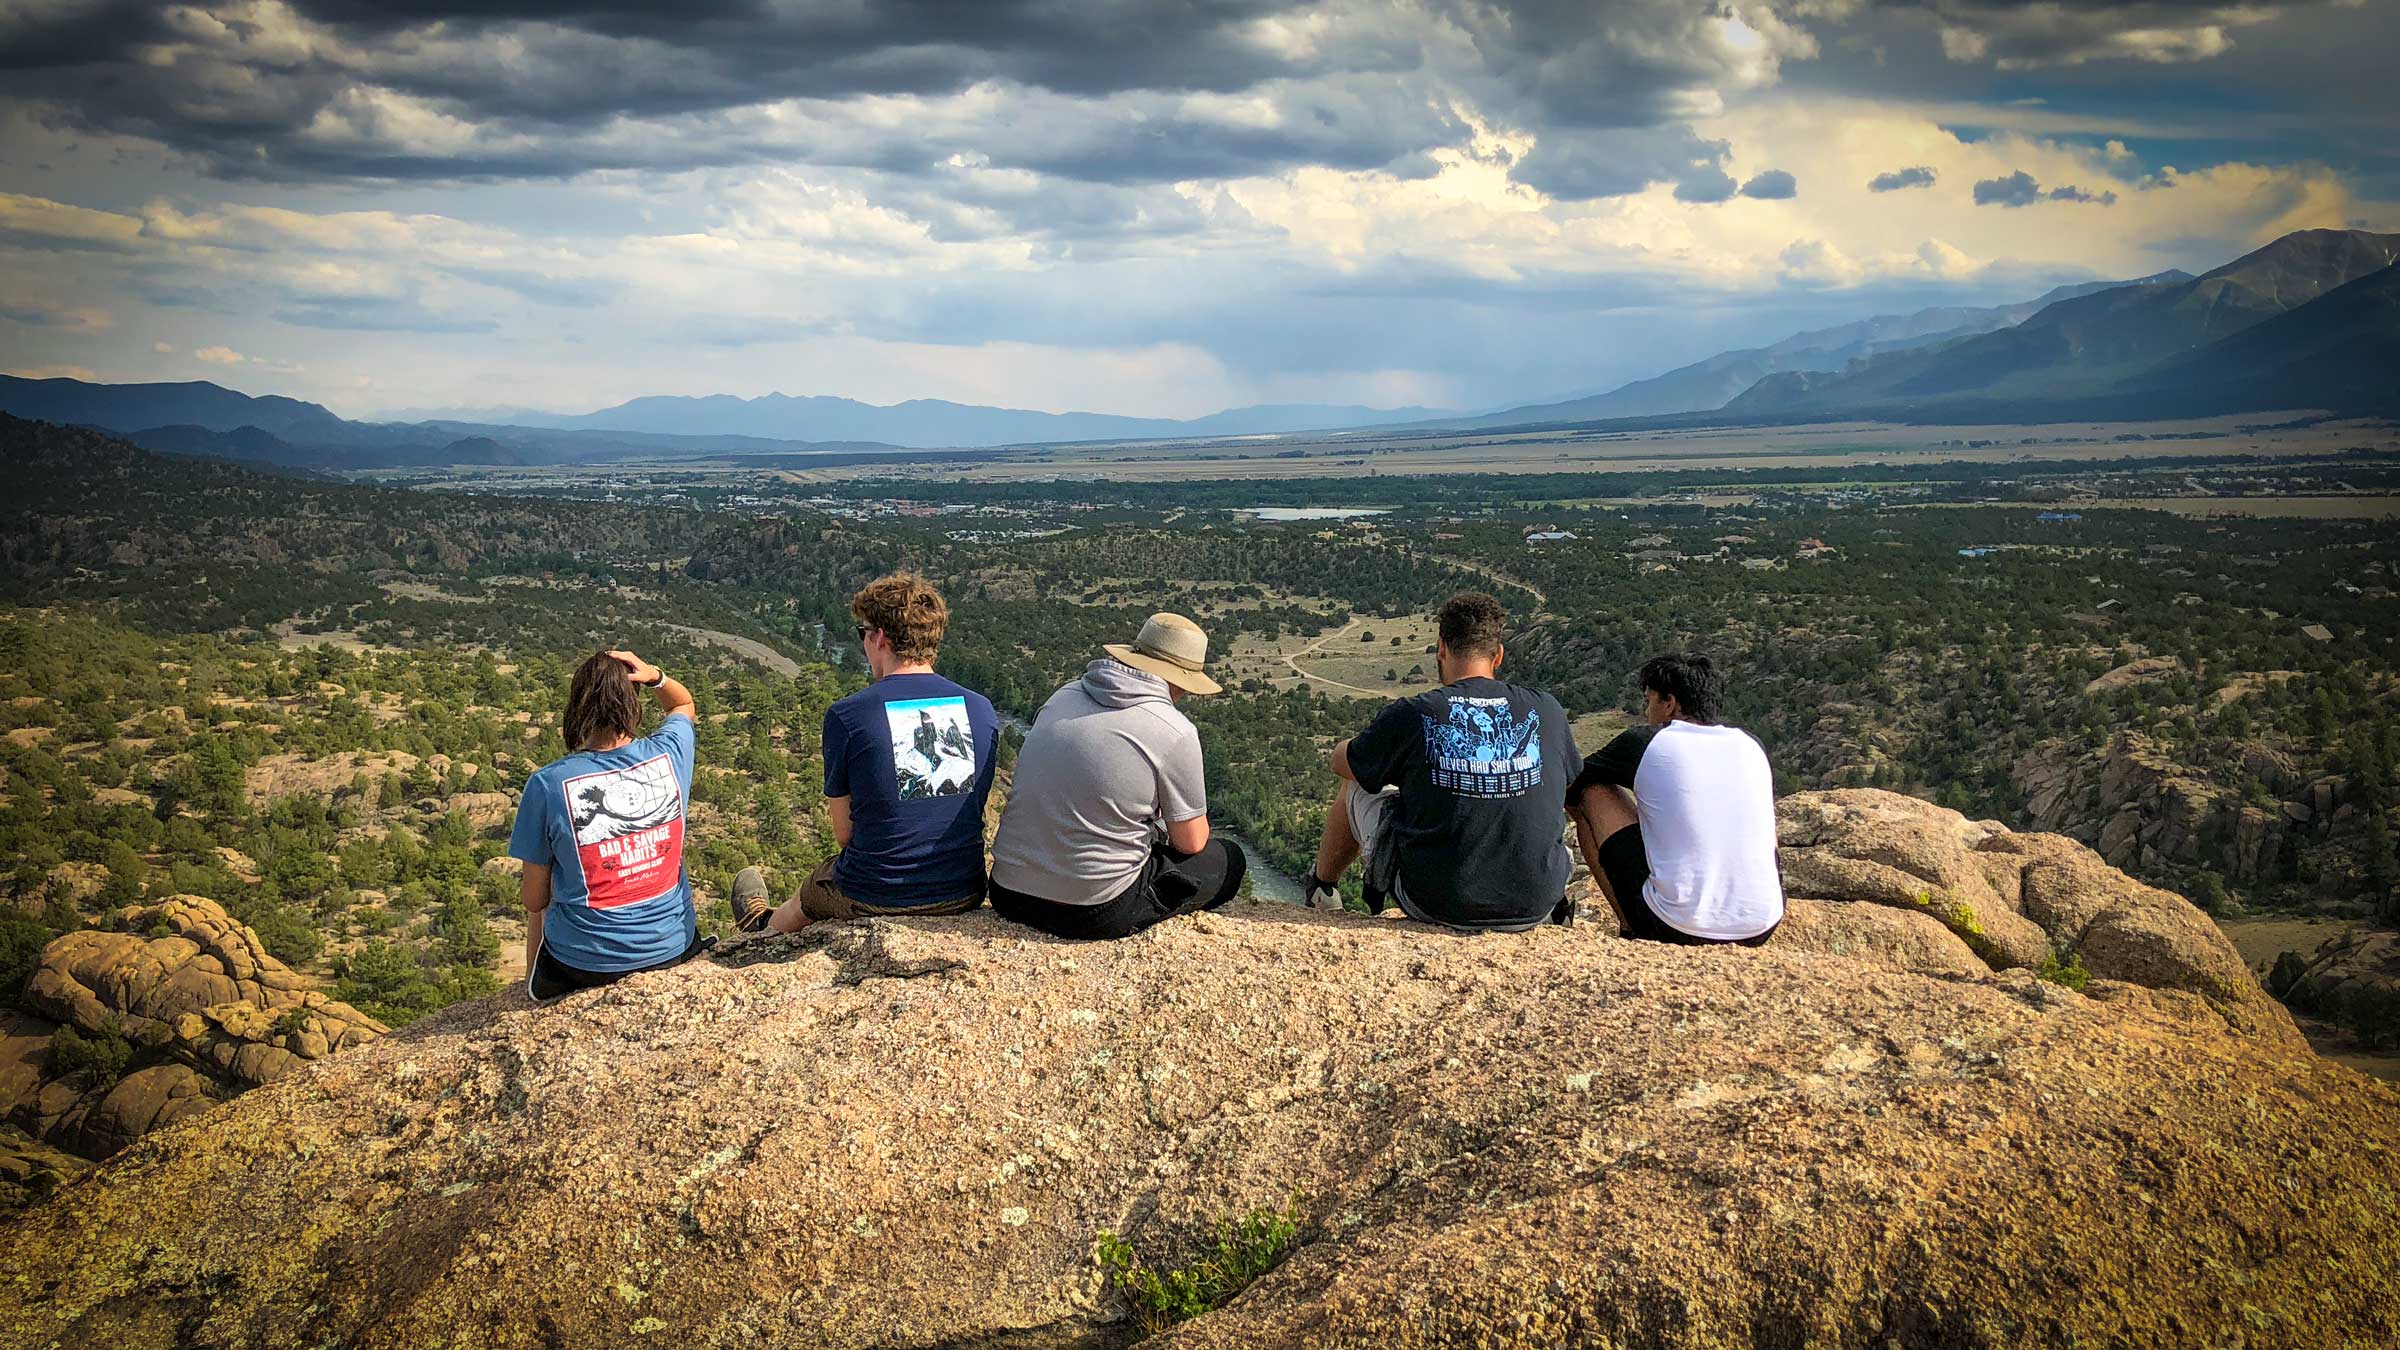 Greenway Leadership Corps members sit on a hill after a hike.